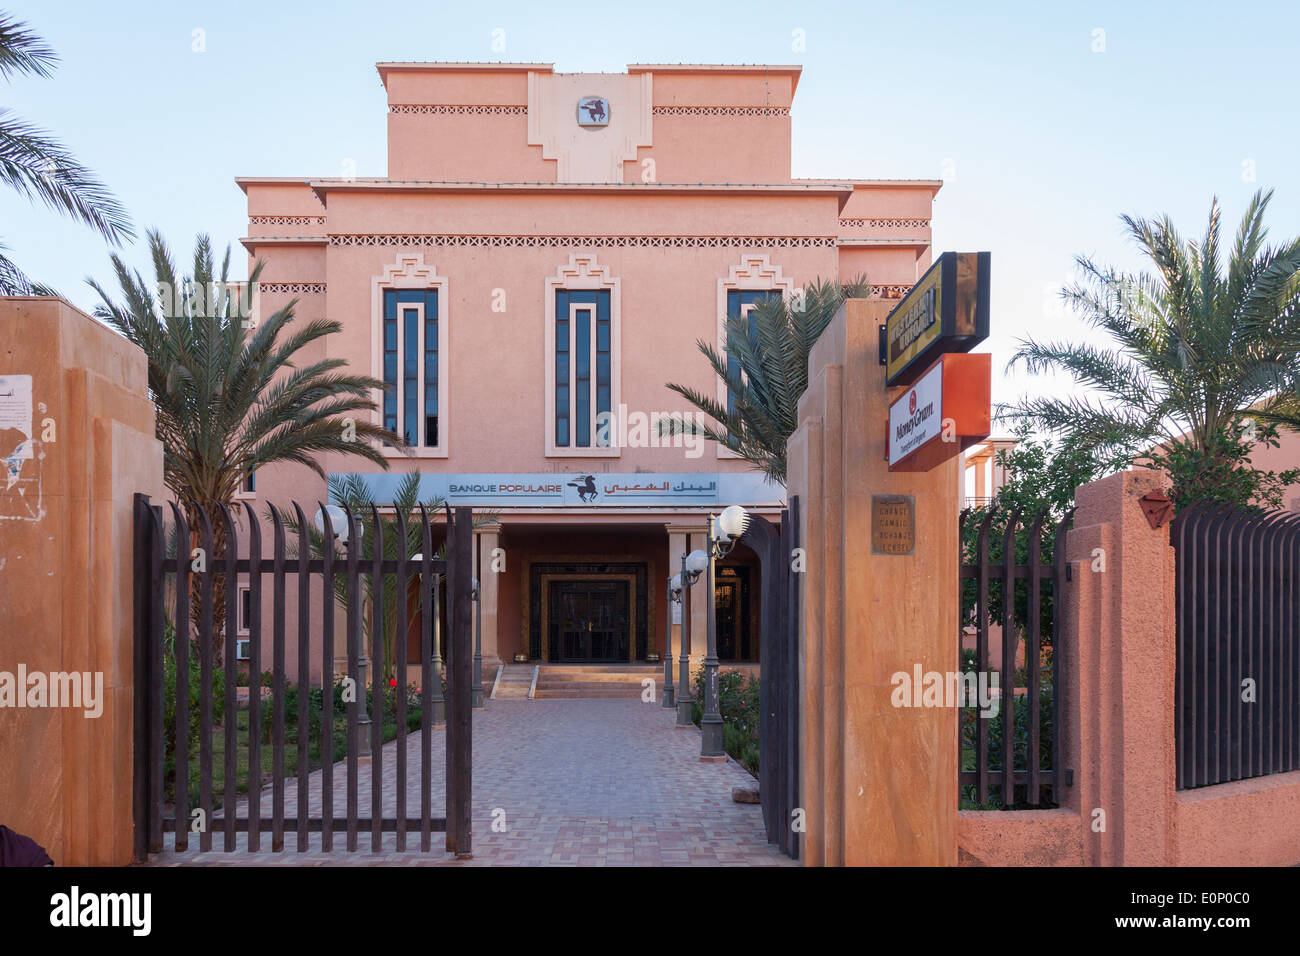 Entrance and front exterior of an agency of the Banque Populaire in Ouarzazate, Morocco. The BCP is a major Moroccan bank. Stock Photo